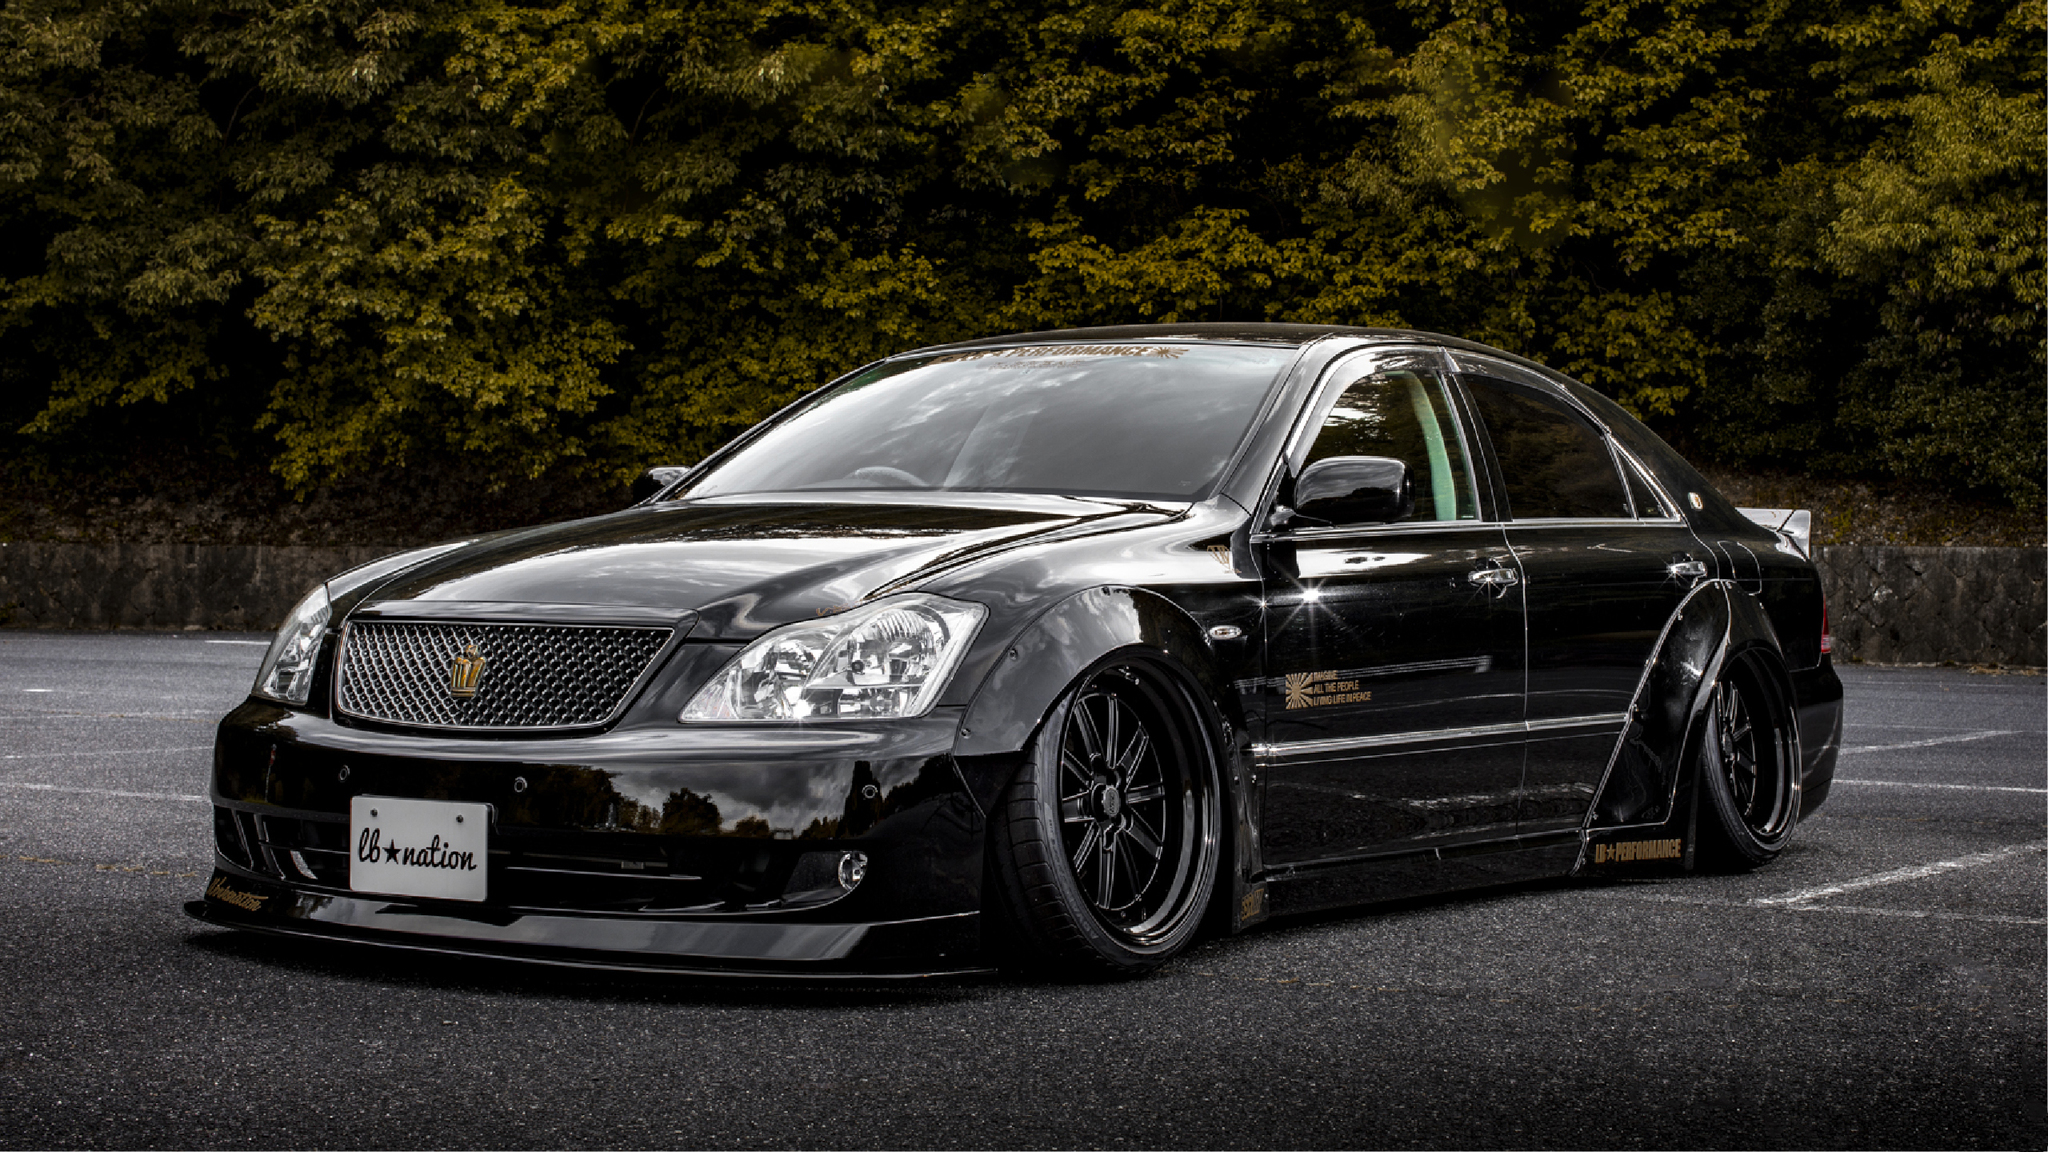 Liberty Walk nation body kit for Toyota Crown new model